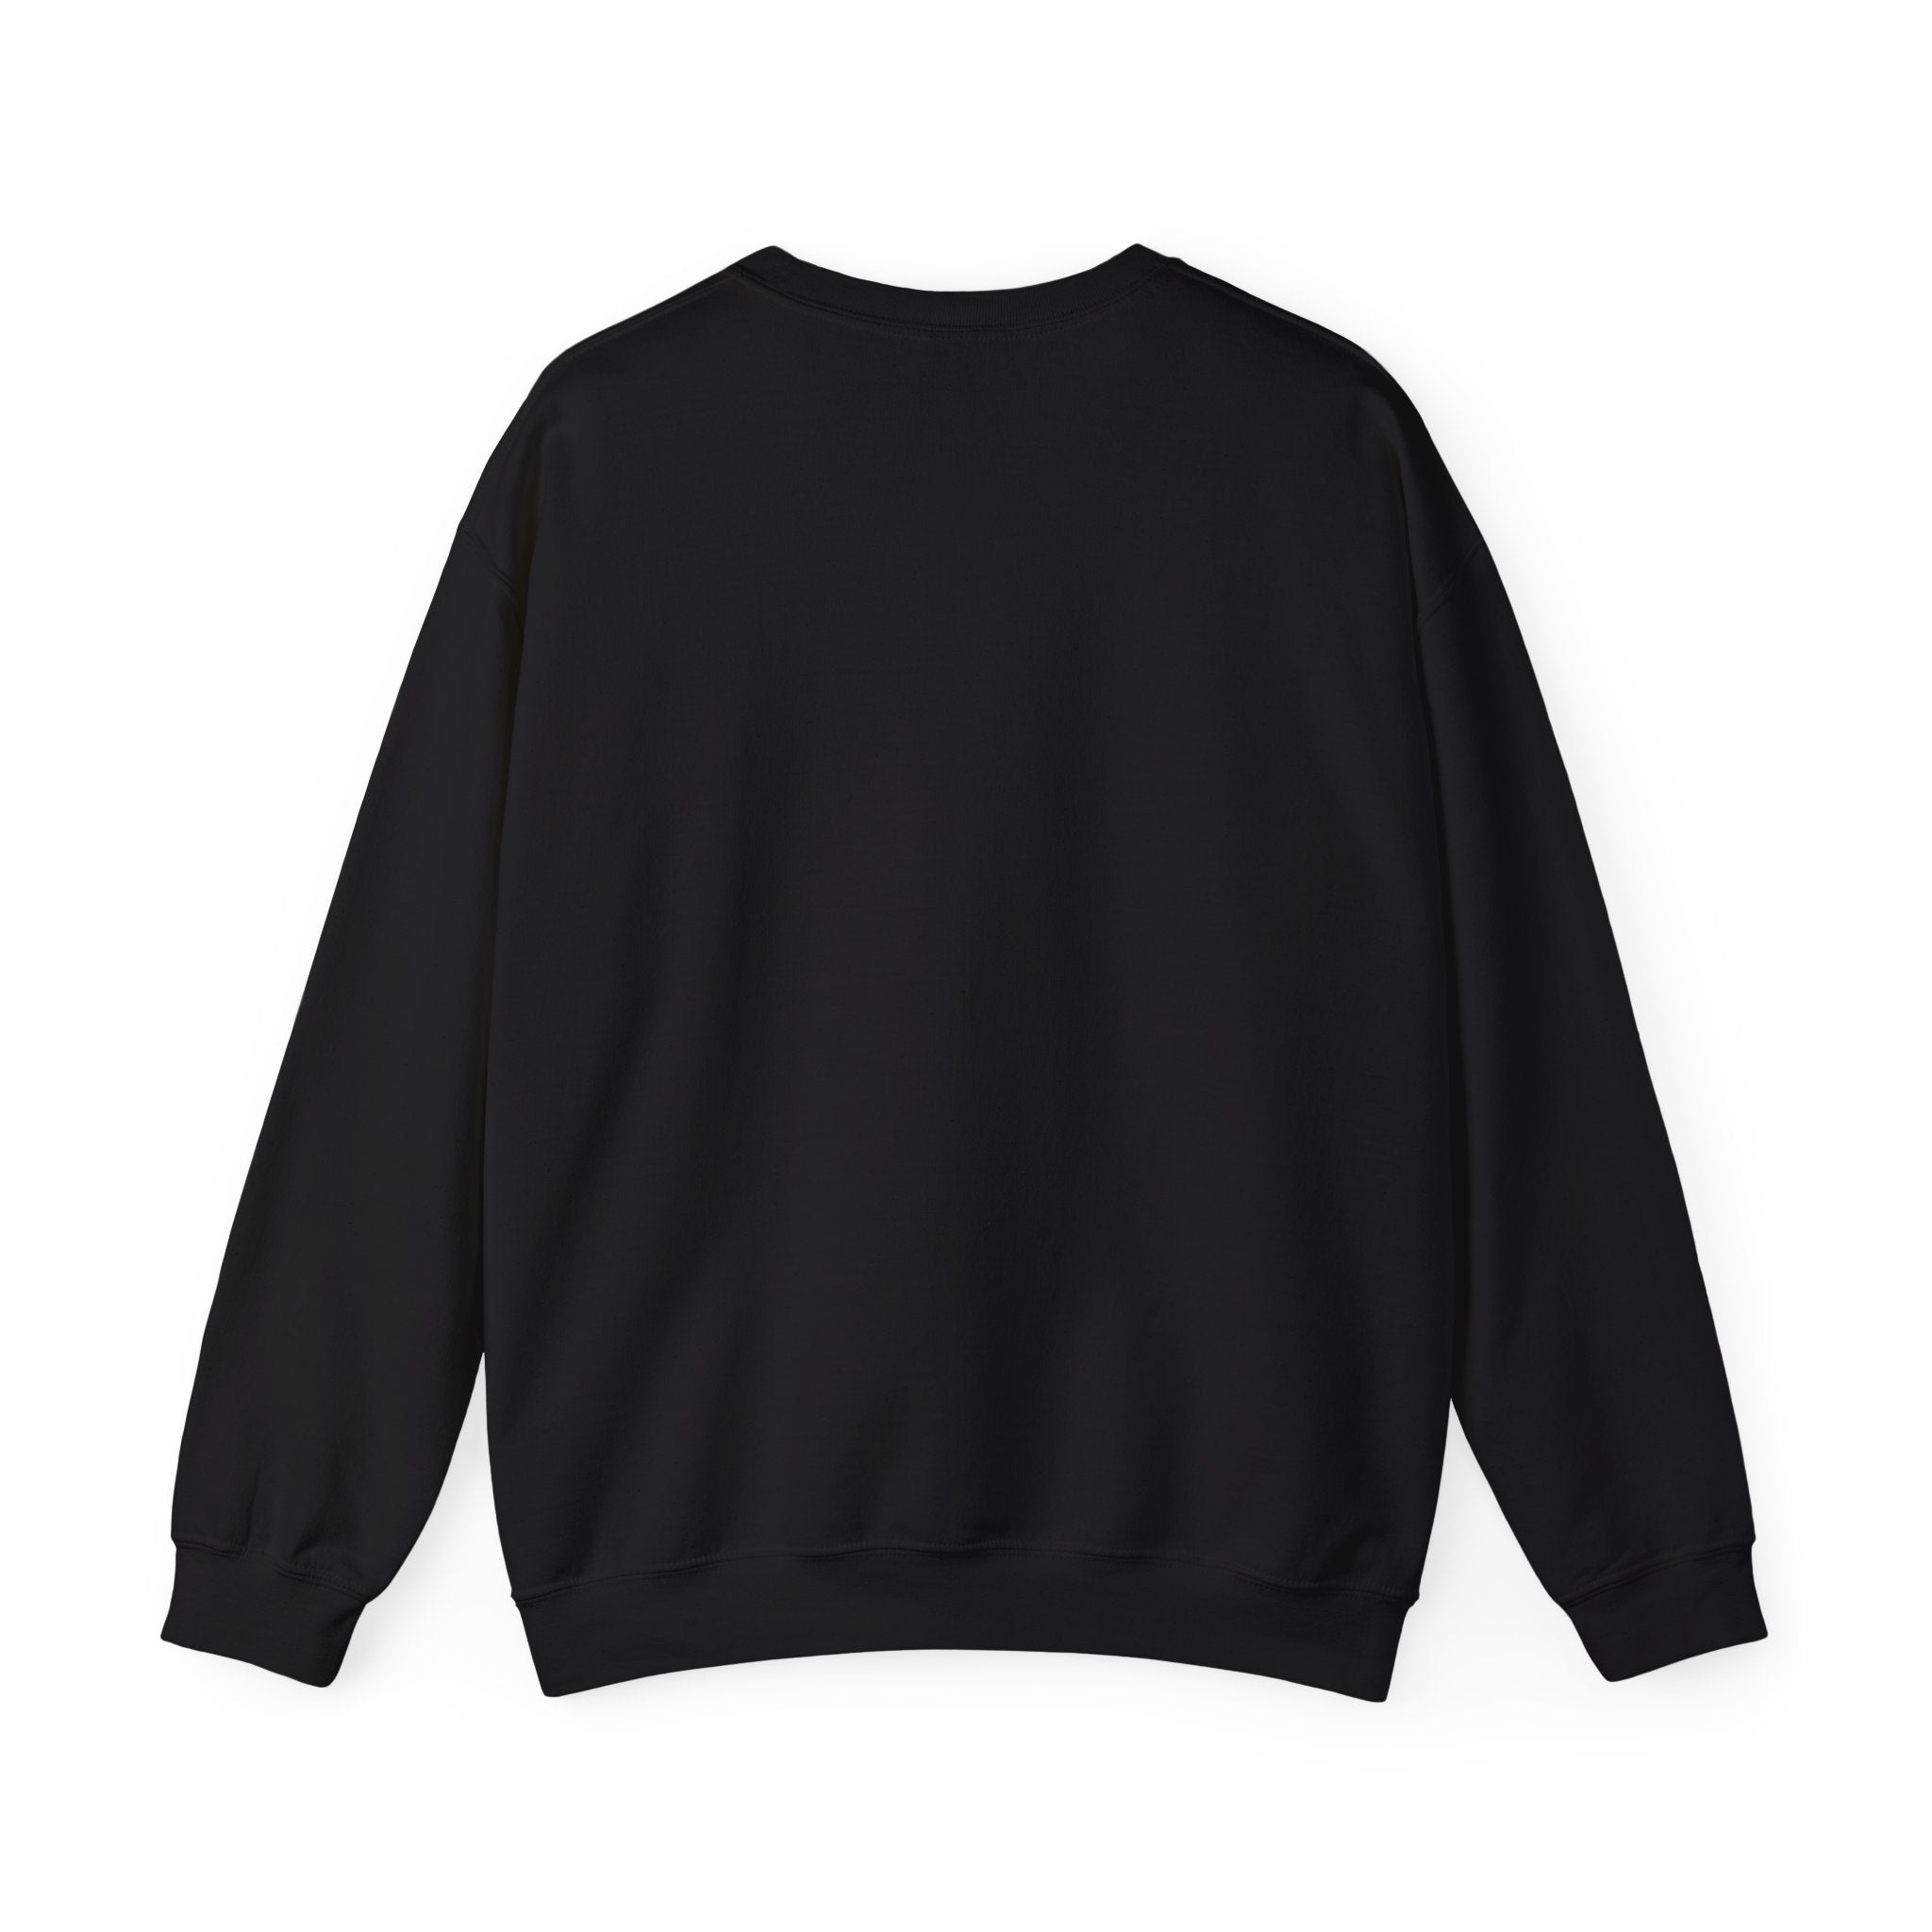 A plain black long-sleeve Professional Overthinker - Sweatshirt with a crew neckline, perfect for overthinking sessions on cold months, shown from the back.